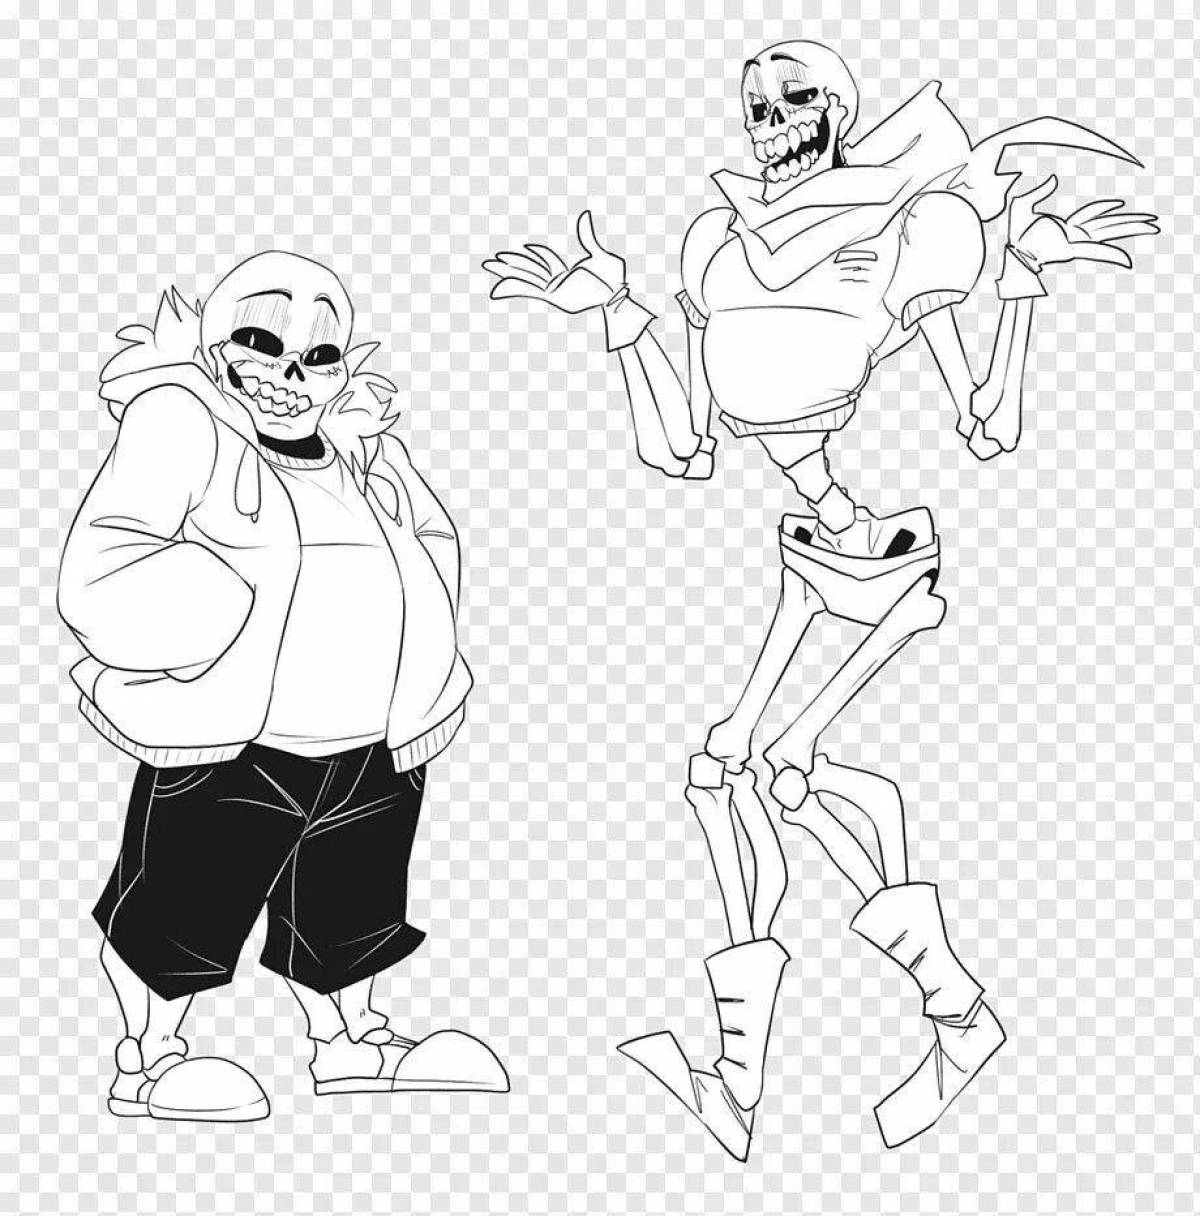 Interesting undertail coloring by numbers